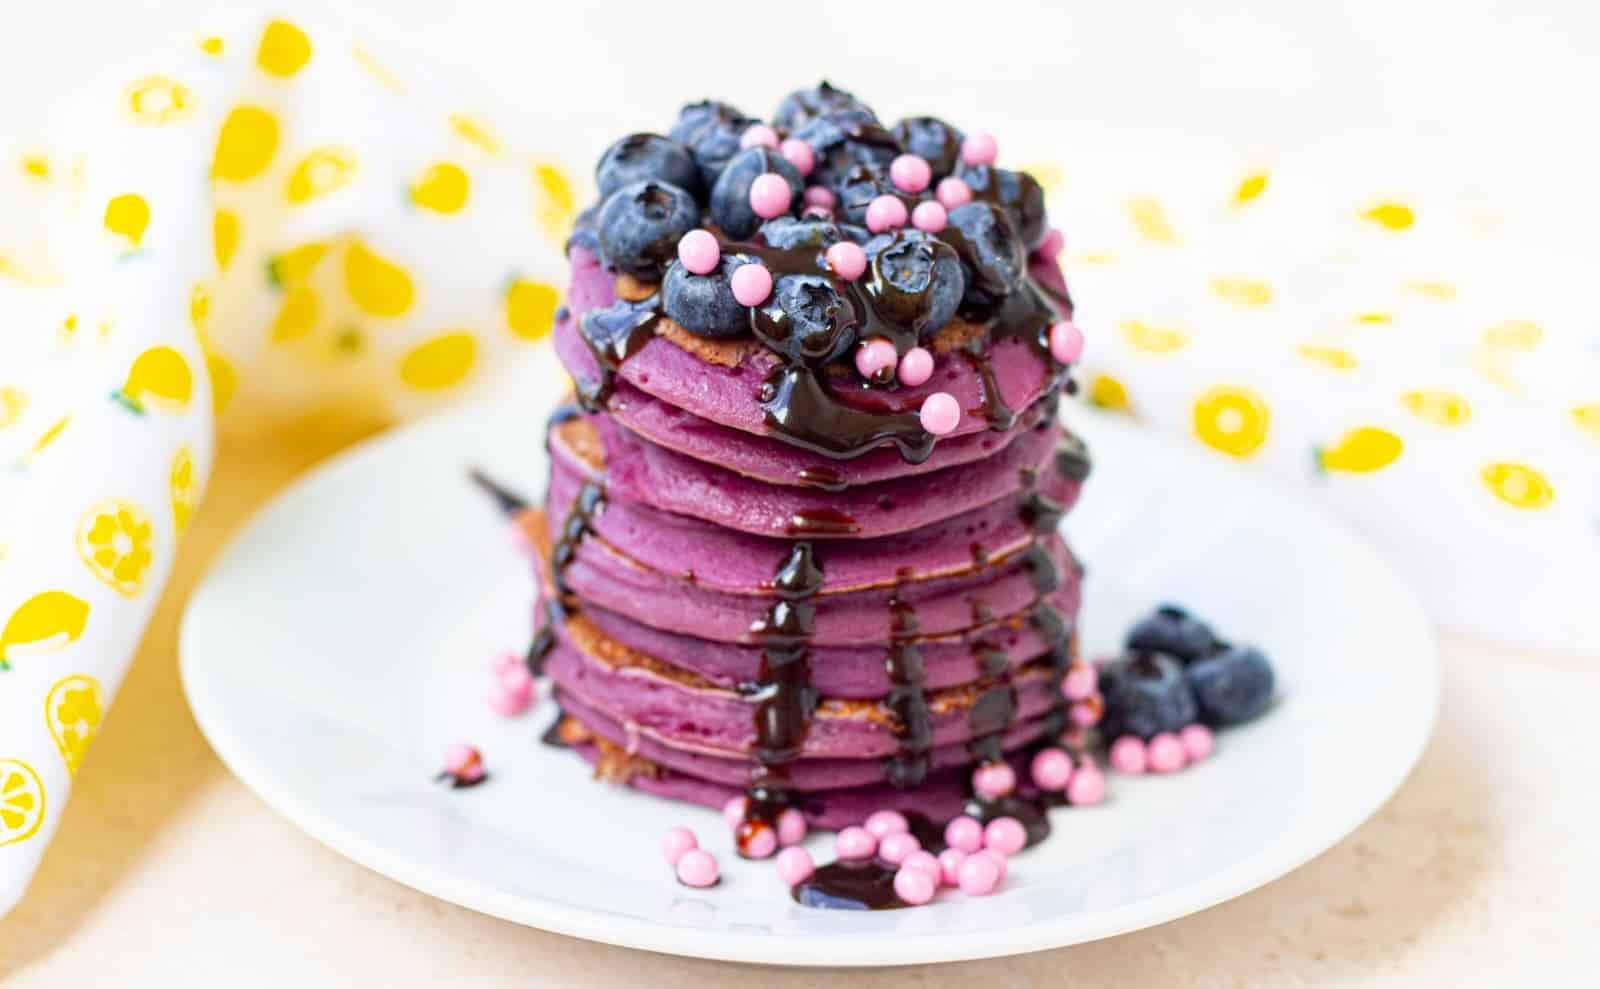 A stack of purple pancakes with blueberries and chocolate sauce on a white plate.